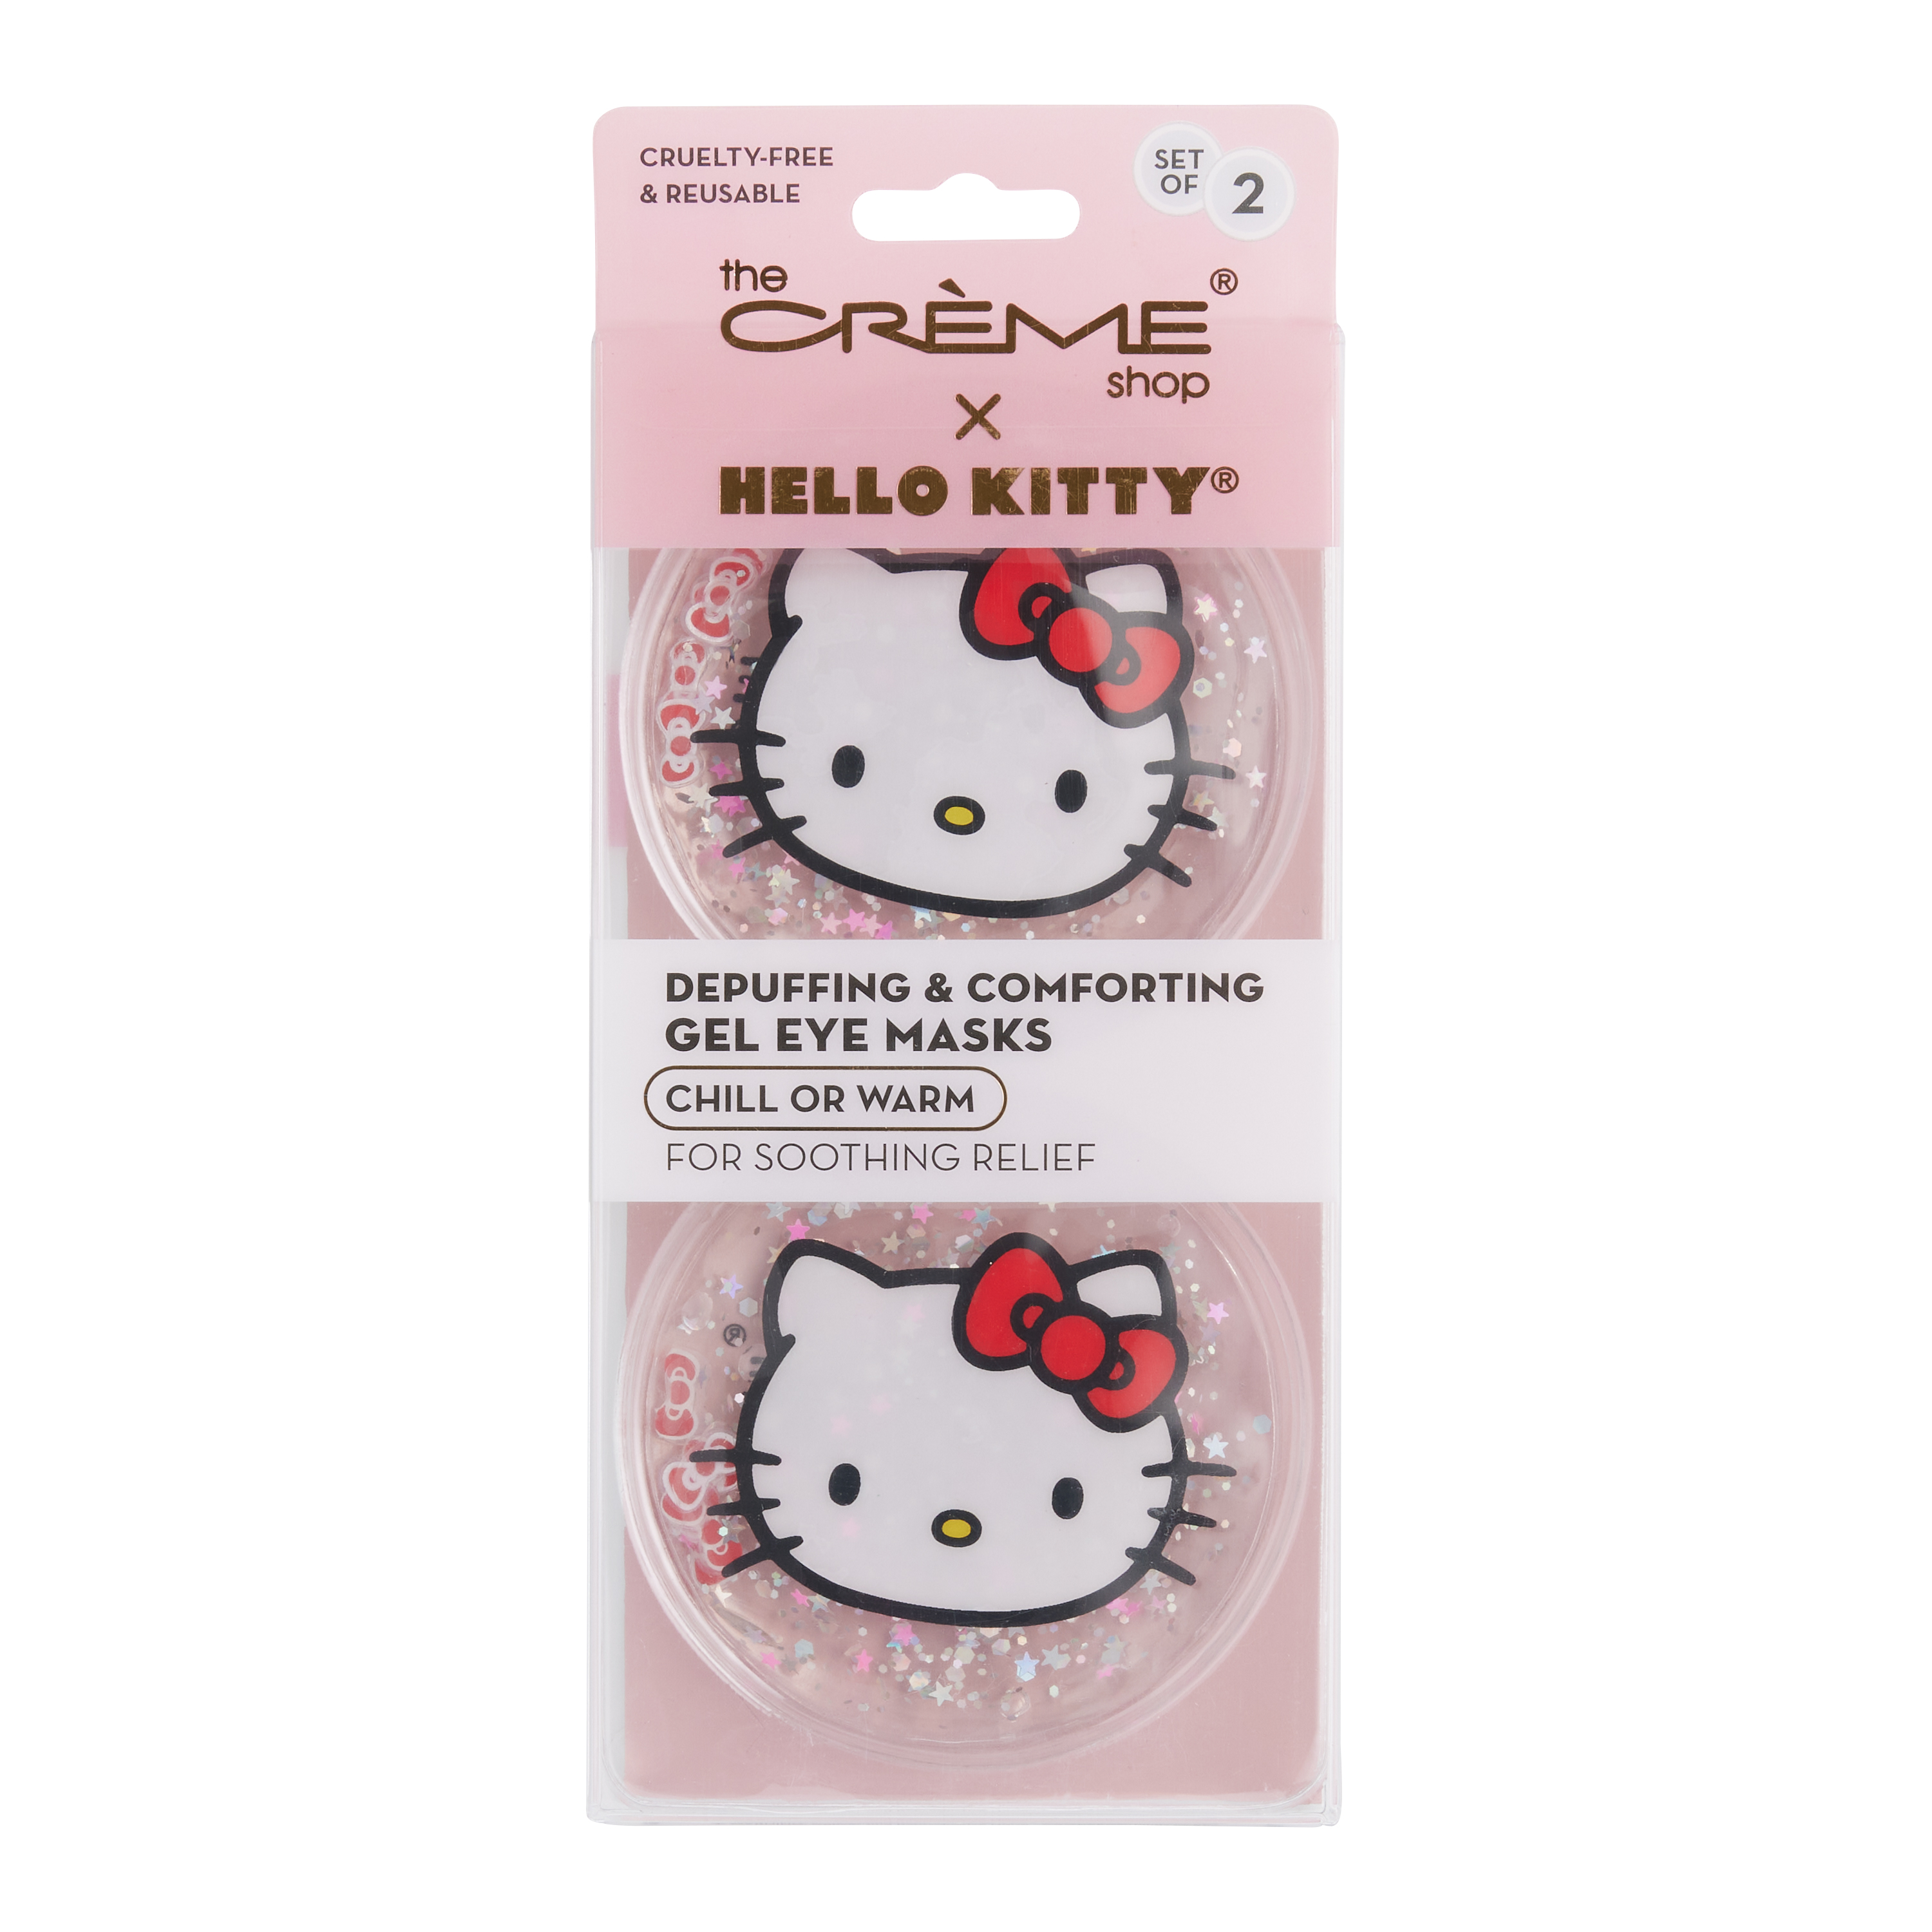 Find more 2 Hello Kitty Sms Text Messenger Handheld Devices for